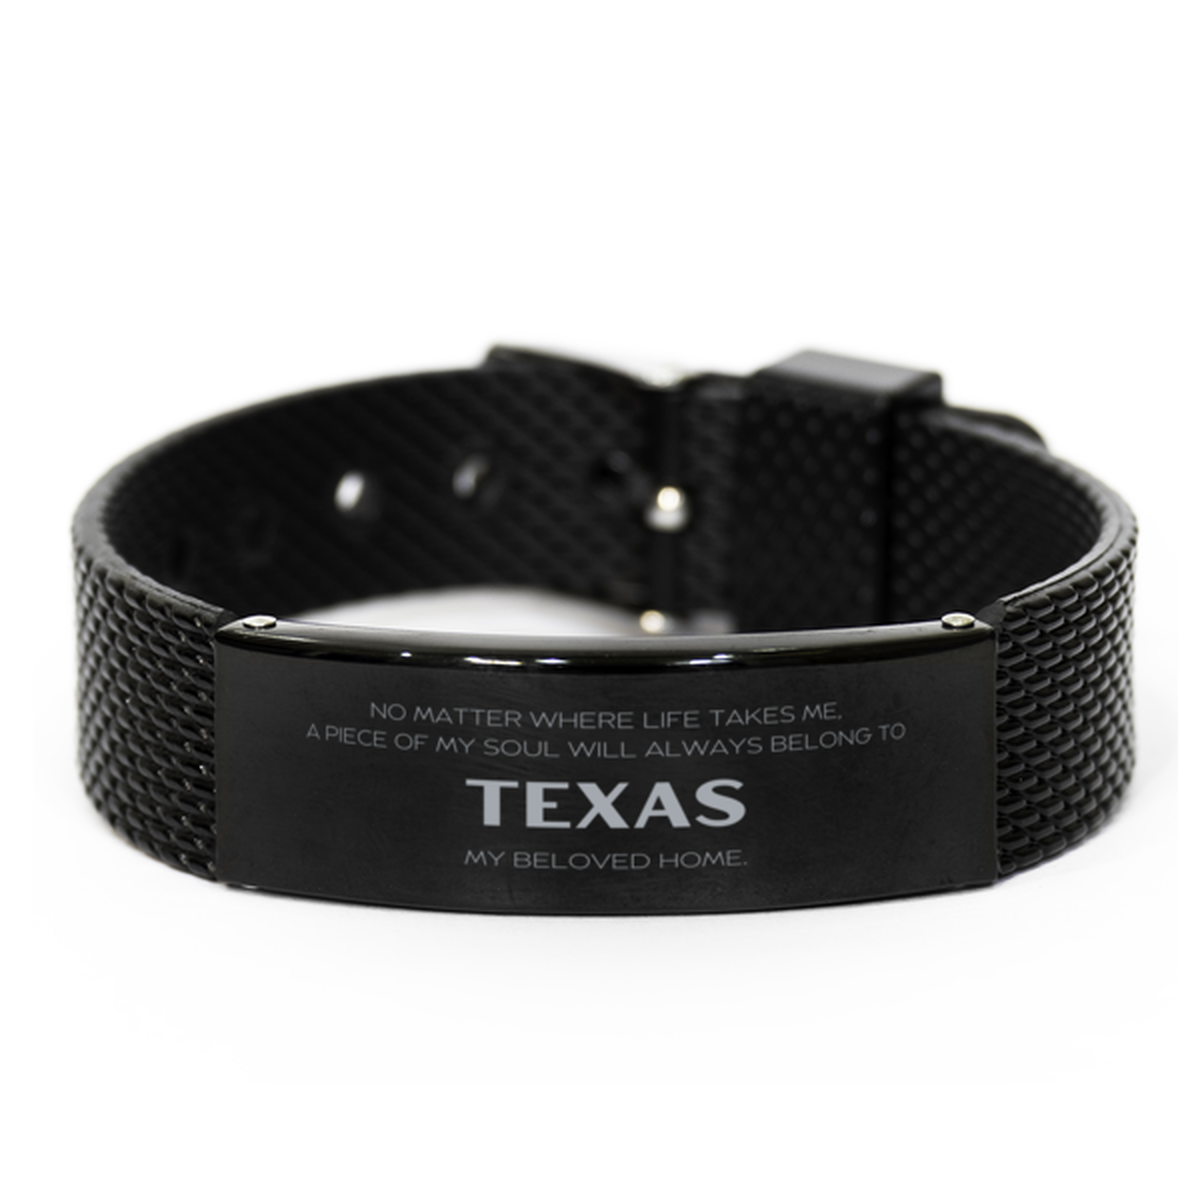 Love Texas State Gifts, My soul will always belong to Texas, Proud Black Shark Mesh Bracelet, Birthday Unique Gifts For Texas Men, Women, Friends